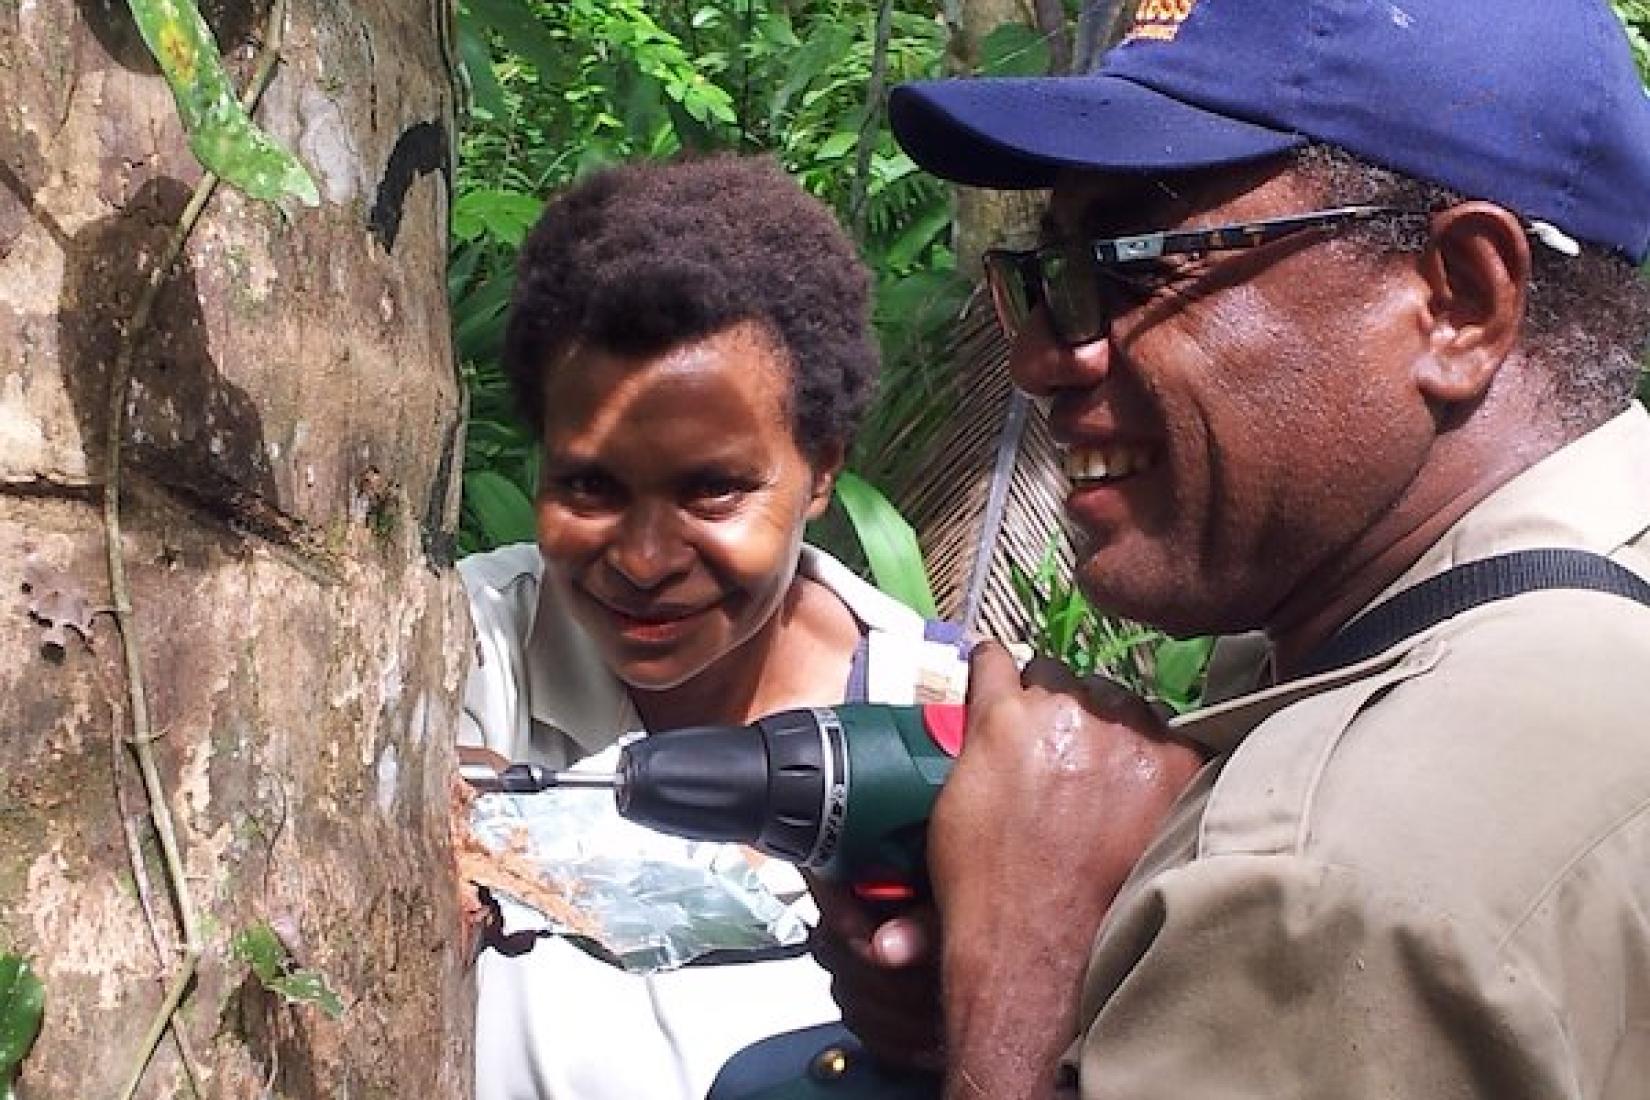 Researchers drilling to collect samples of Bogia coconut syndrome (BCS) in Papua New Guinea.